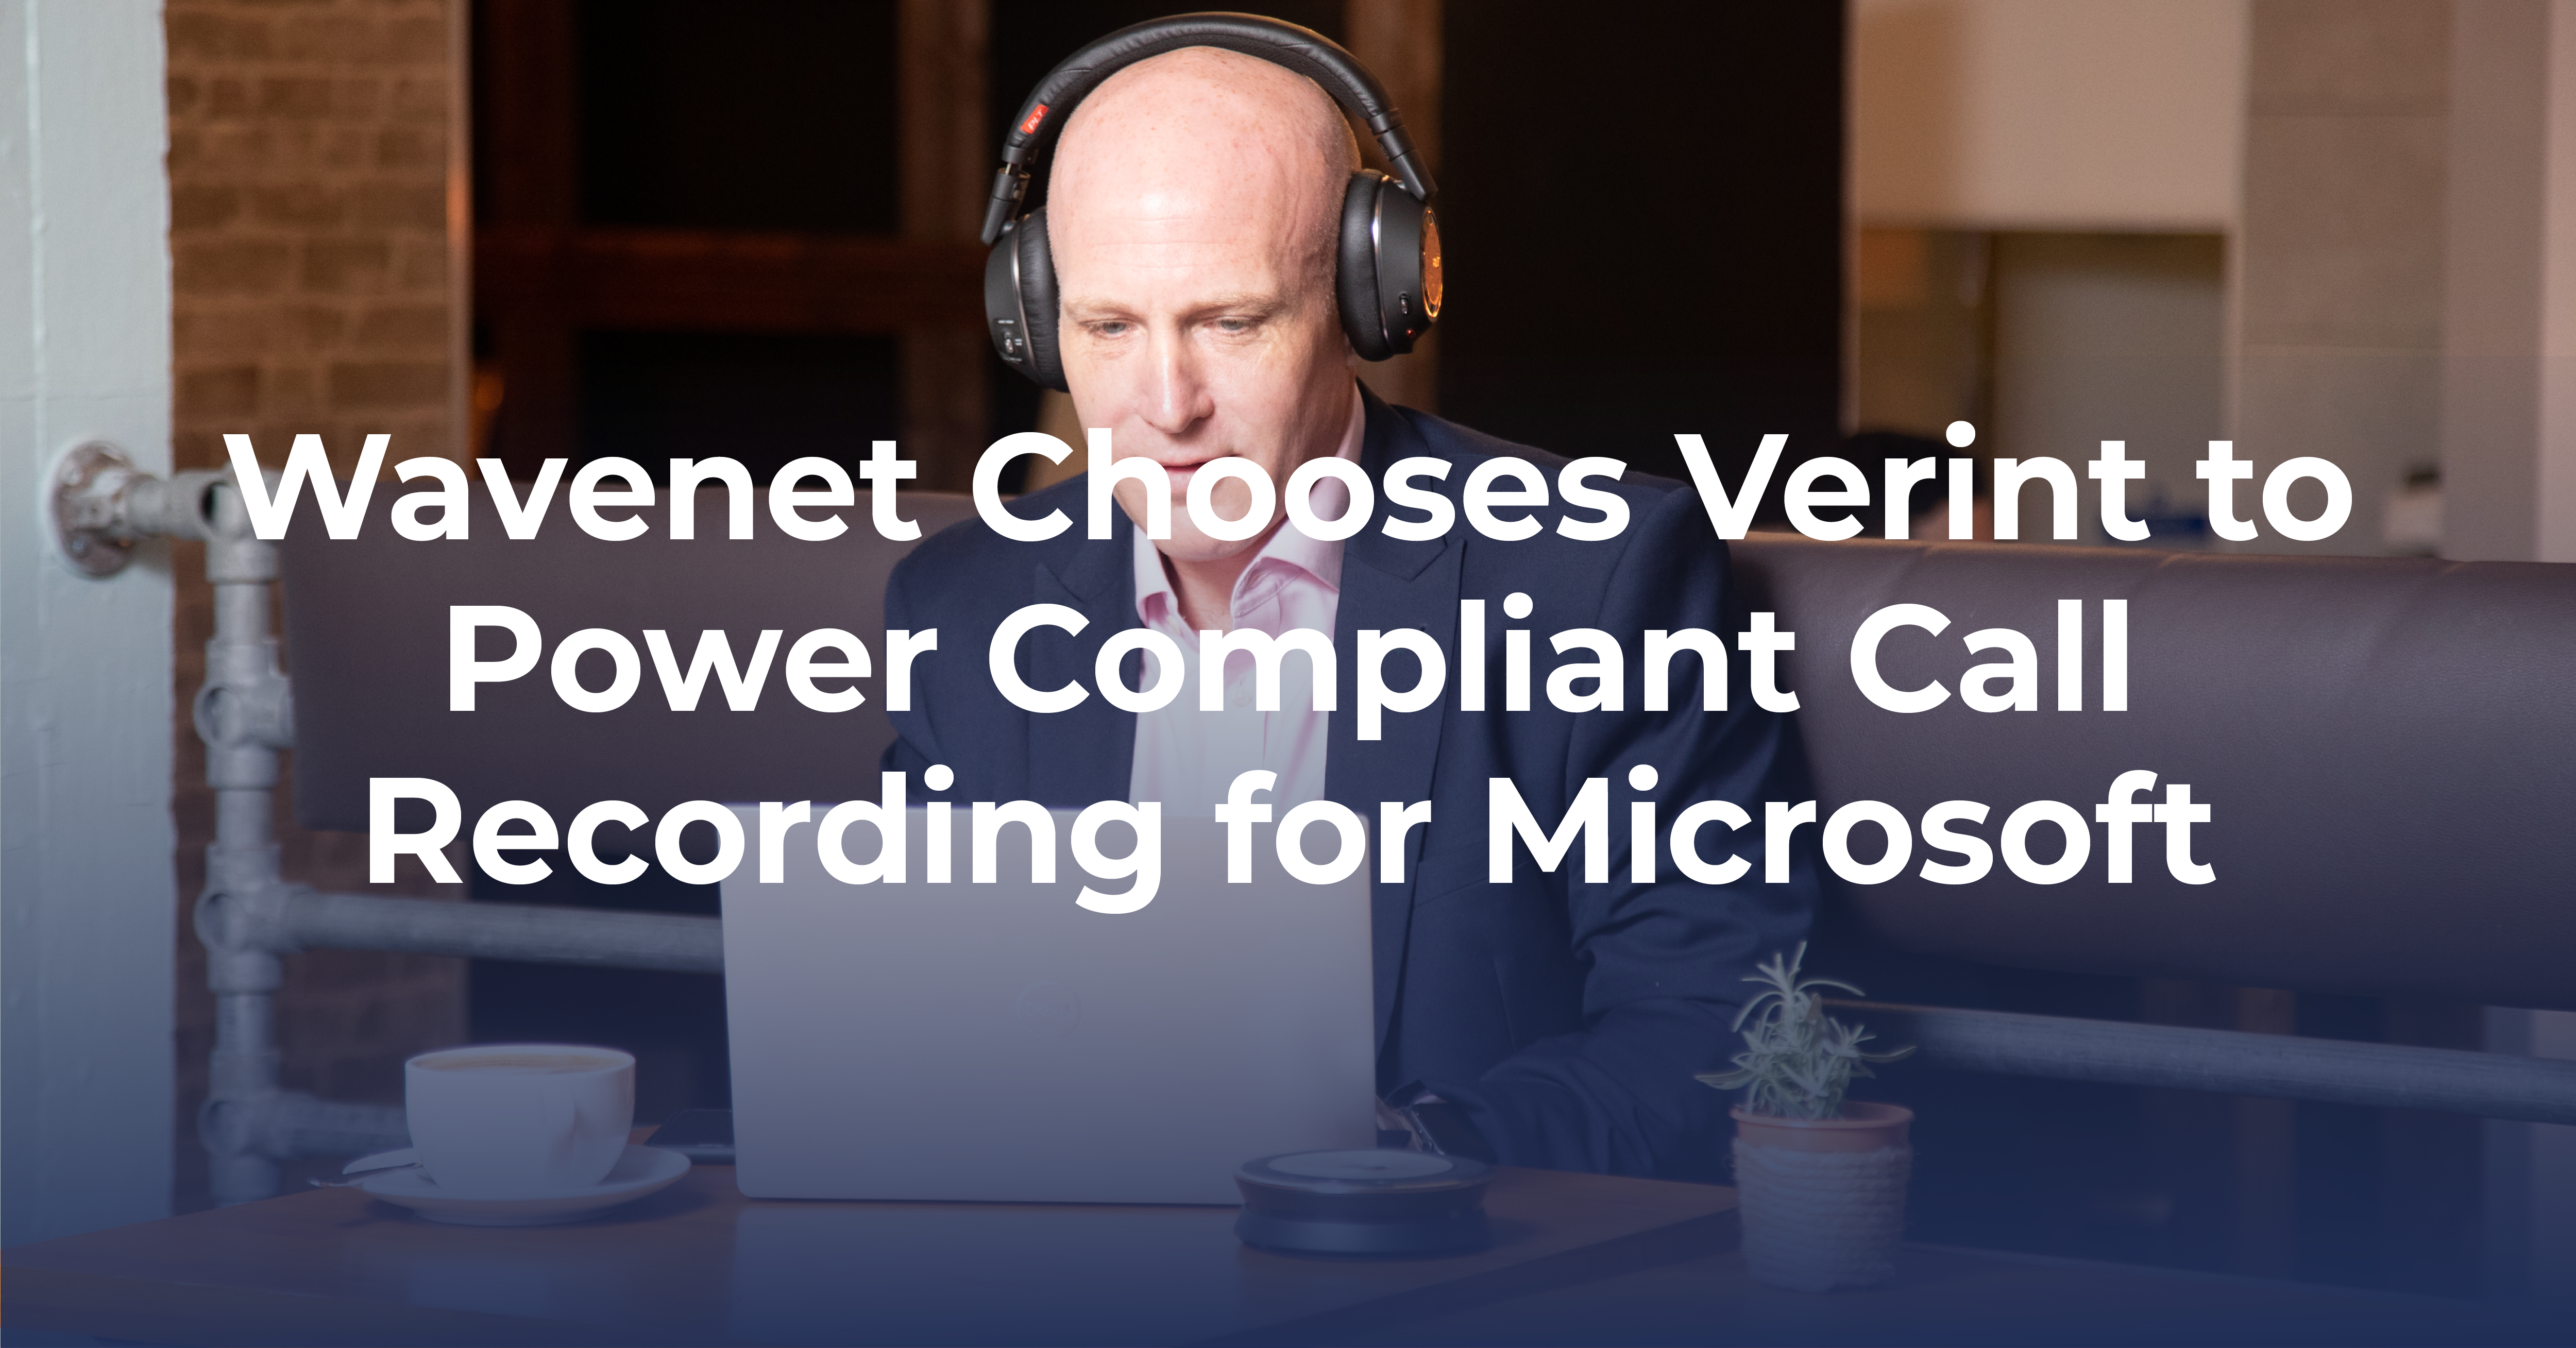 Wavenet Choose Verint for Compliant Call Recording in Microsoft Teams placeholder thumbnail